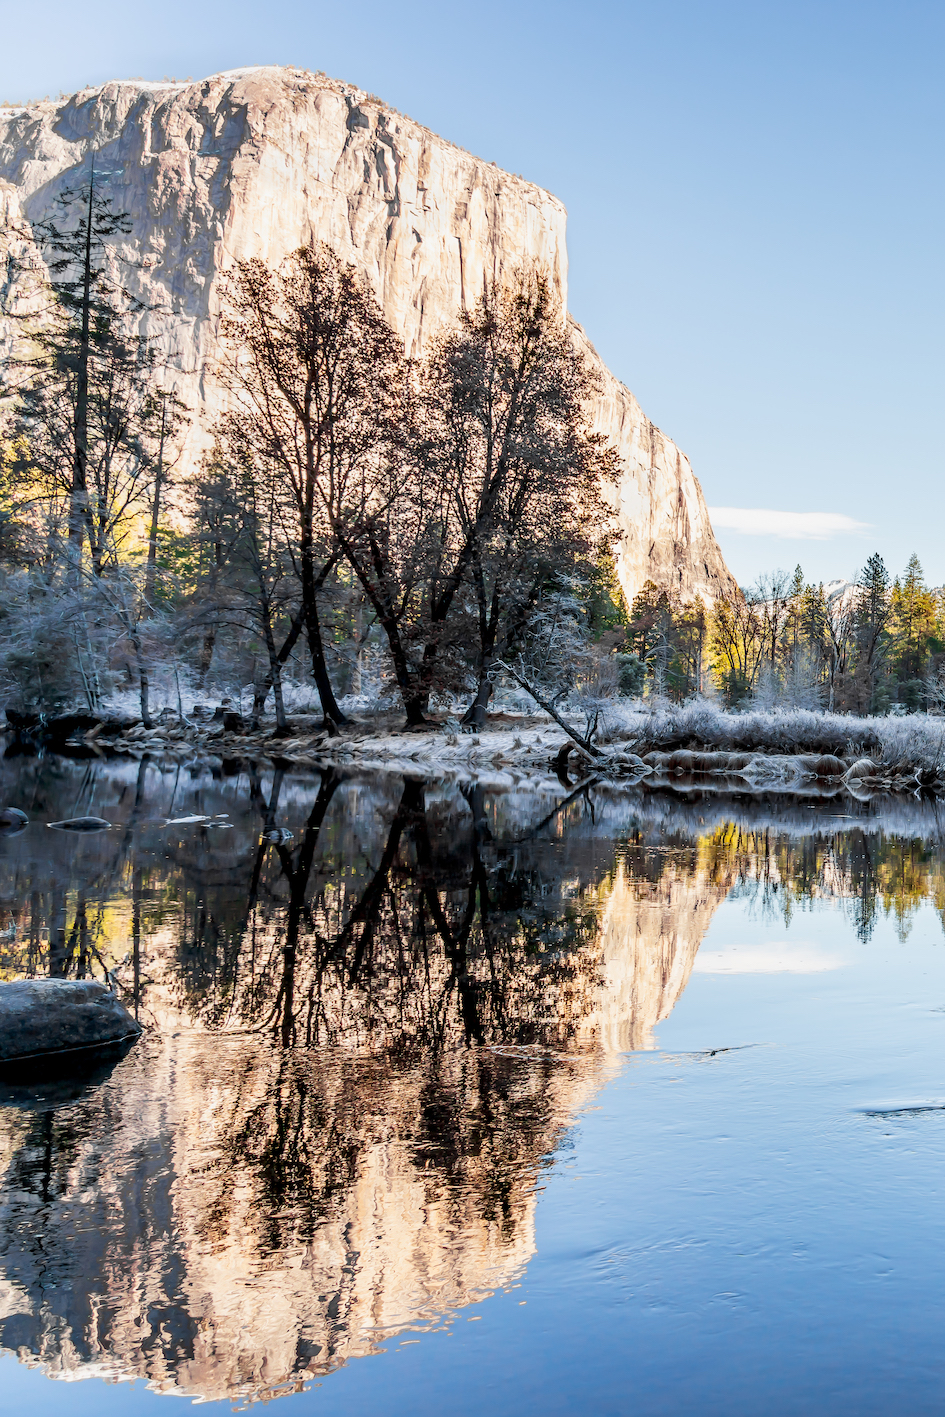 Beautiful view of Yosemite Winter Wonderland from the Valley with snow, Mountains and beautiful trees at Yosemite National Park, California, United States of America.